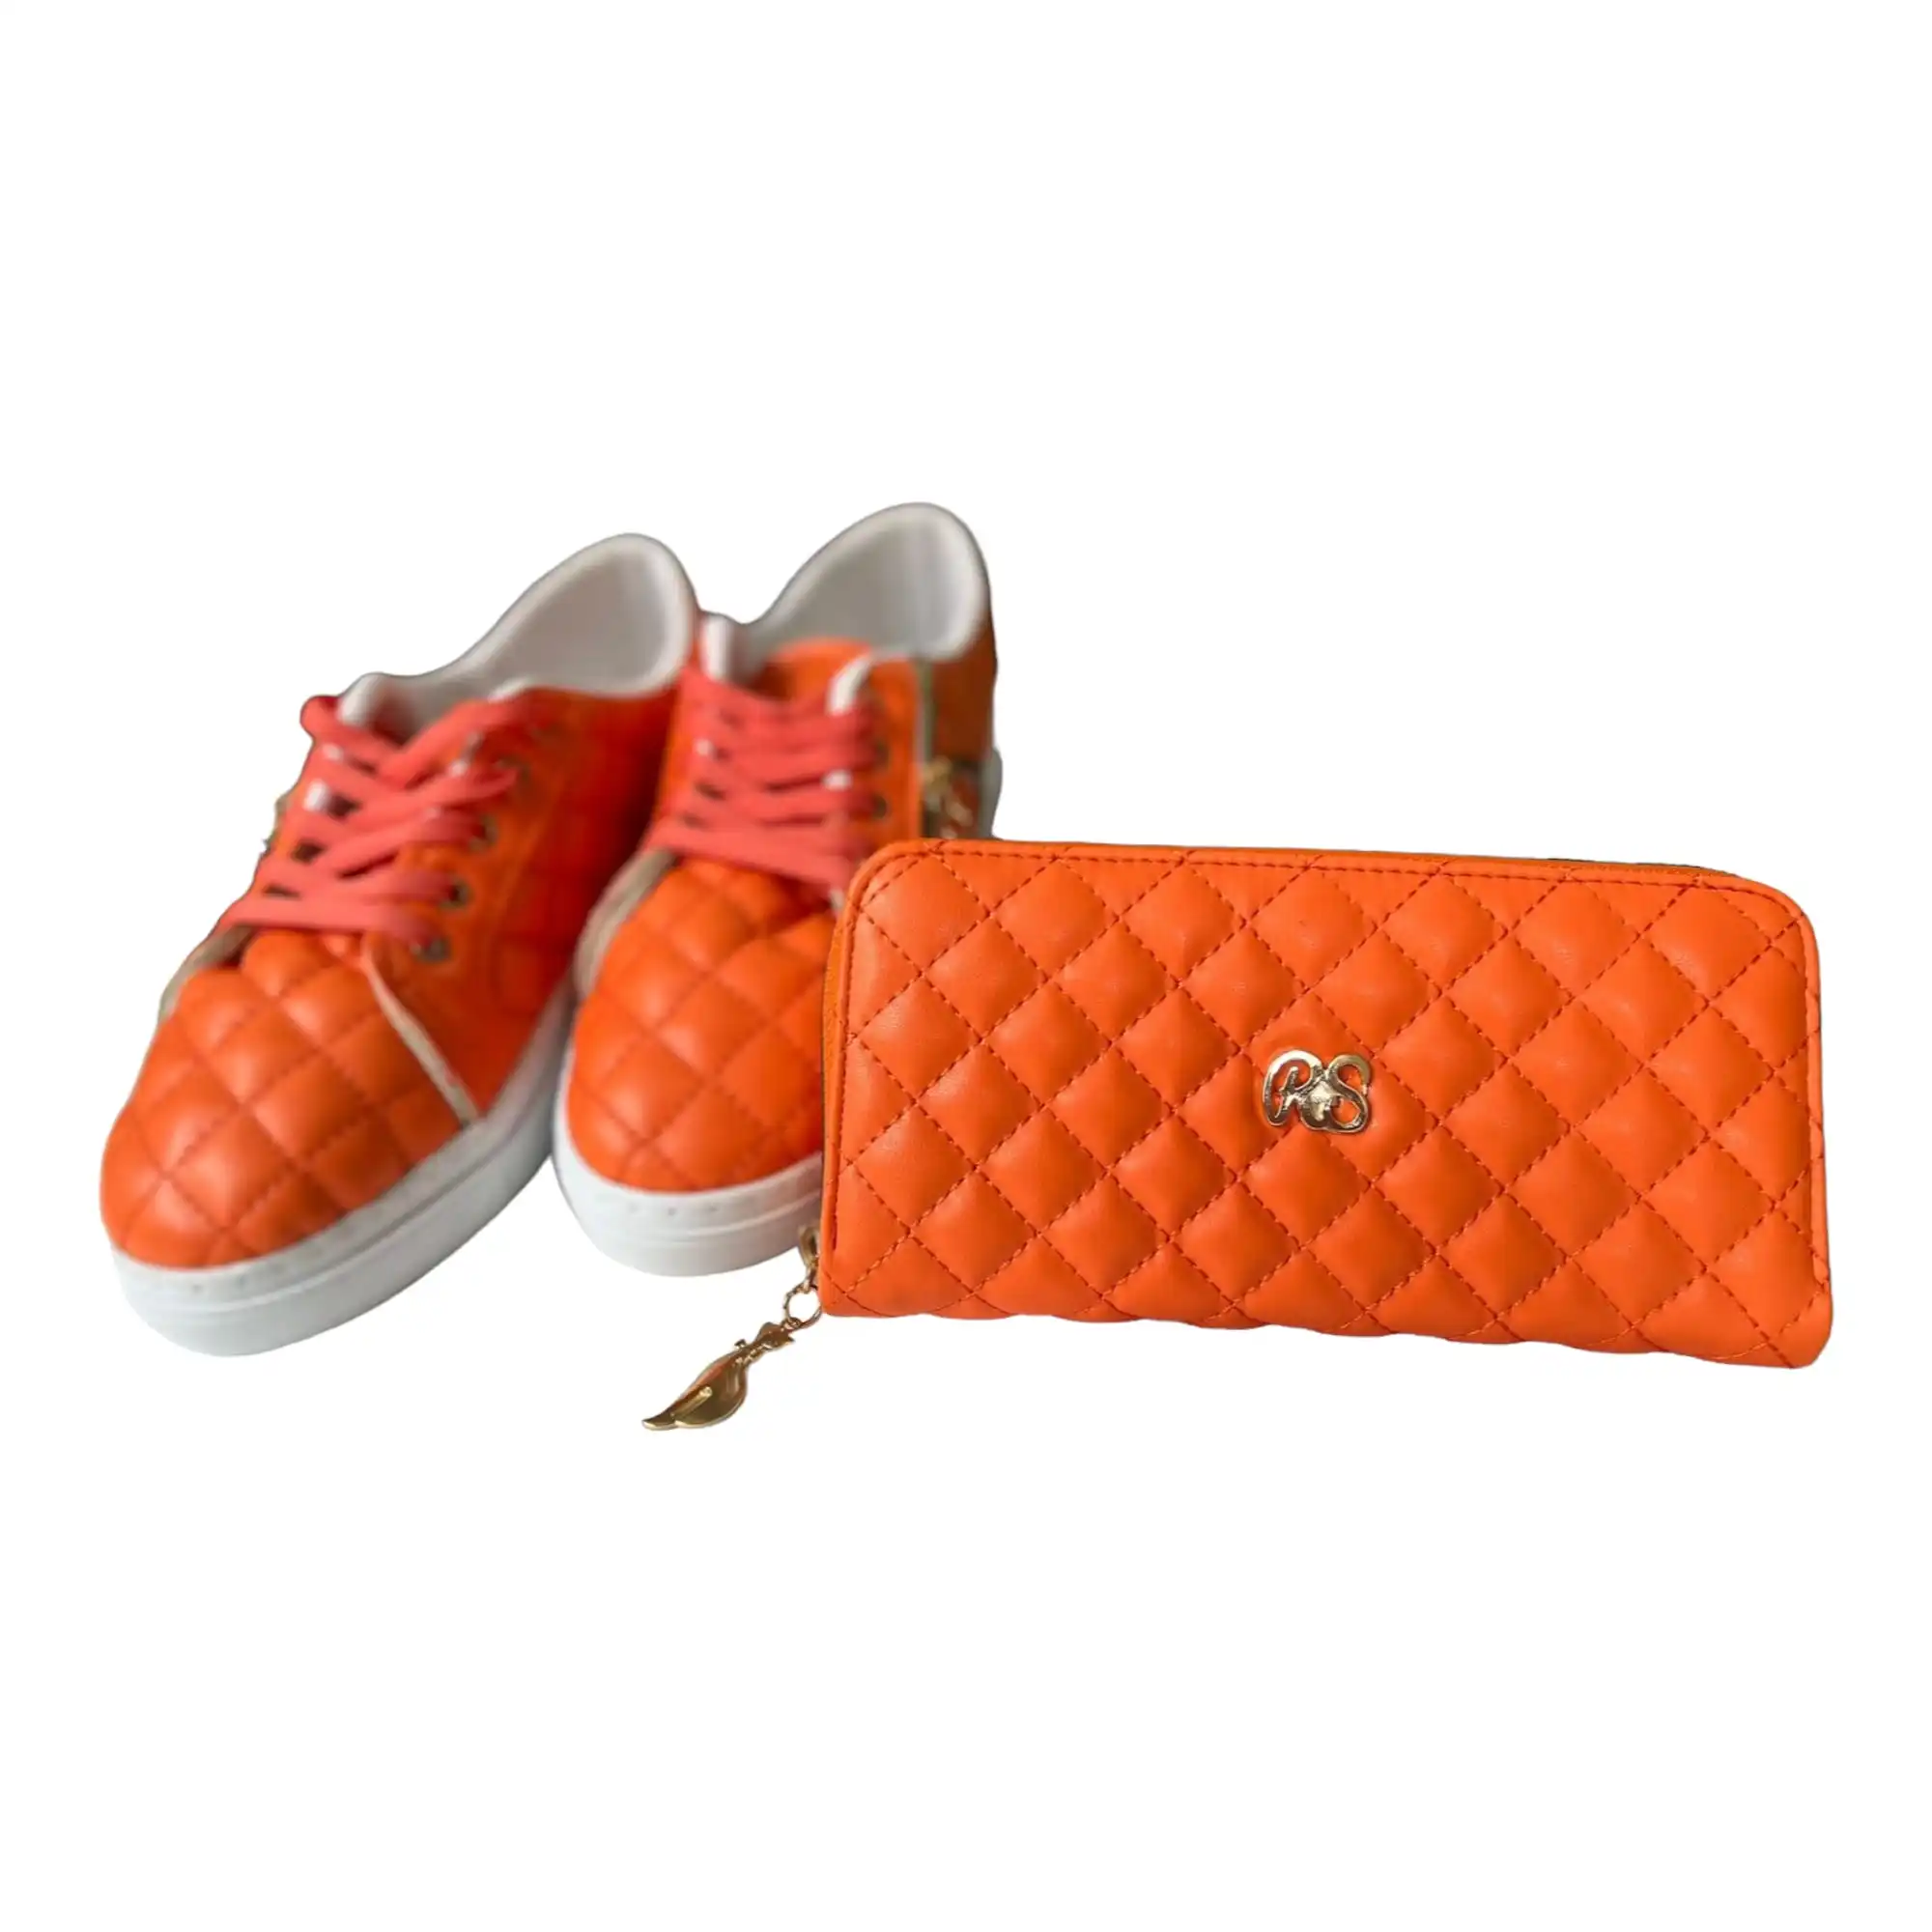 RS RAZAN ISTANBUL Bag and Shoe set, Handbag and sneaker set, cross bag with  matching Sneaker set. matching shoes and purse sets for women by rs razan